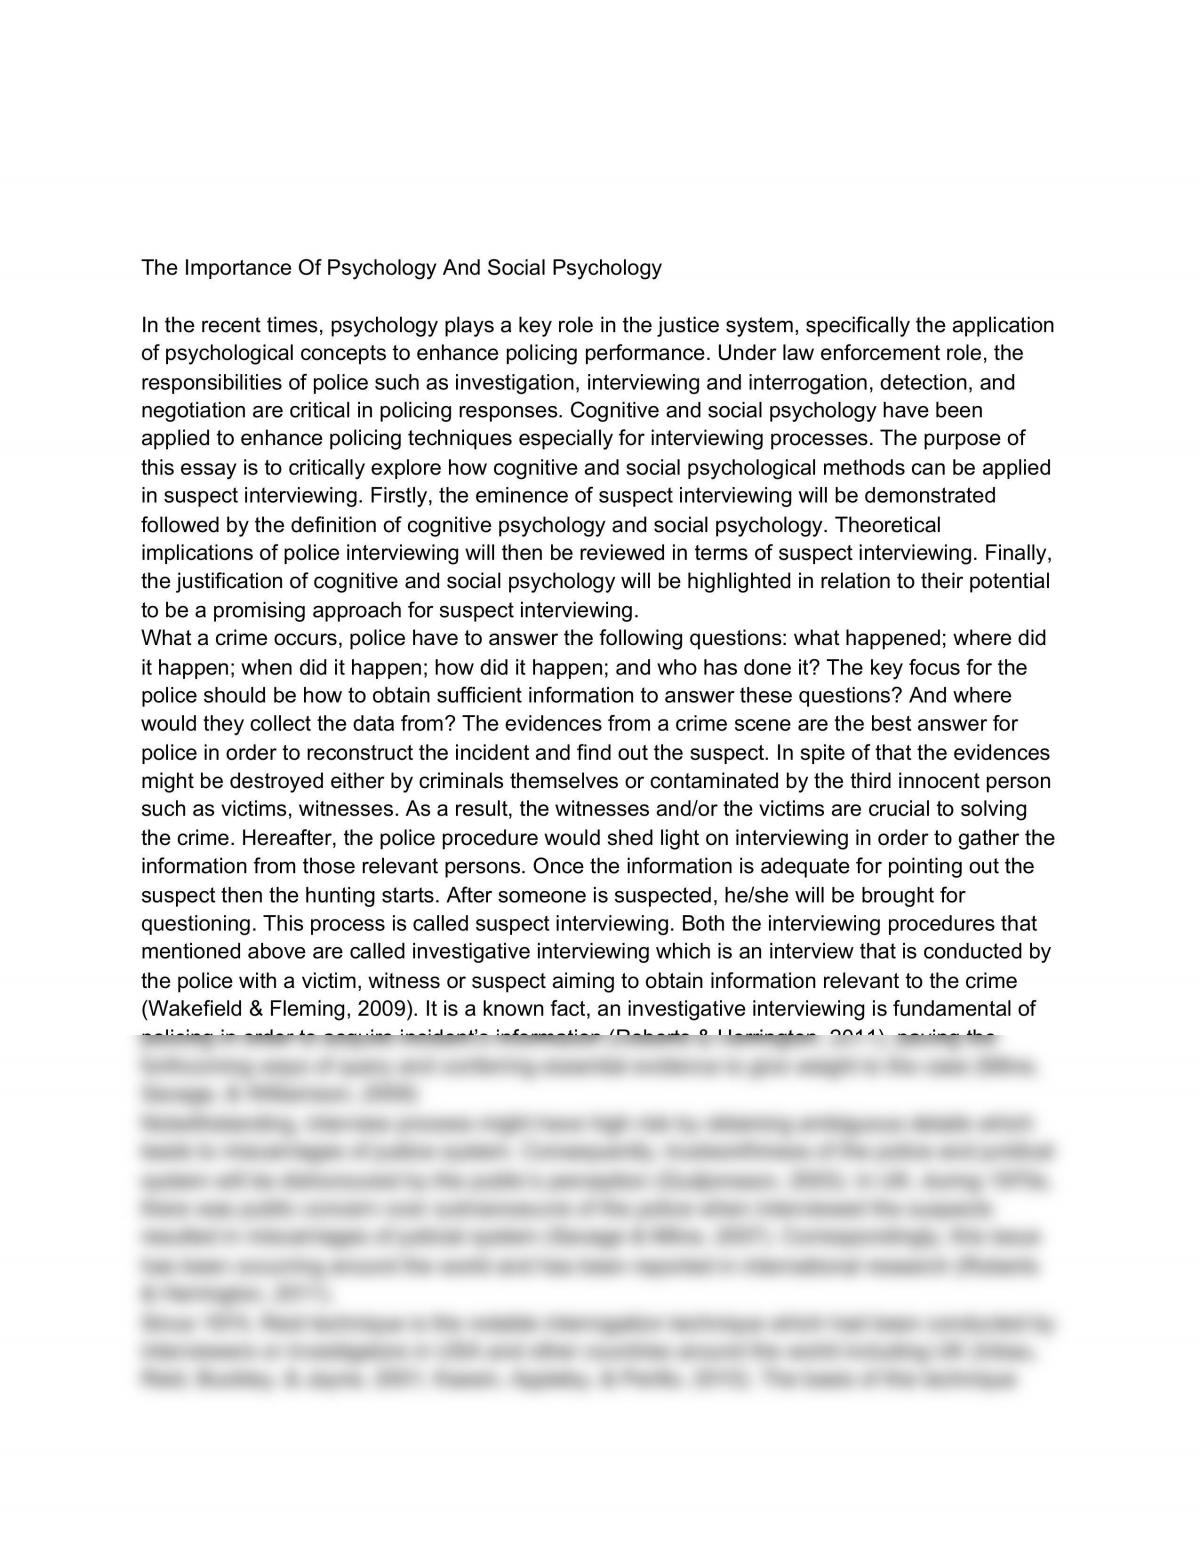 The Importance Of Psychology And Social Psychology - Page 1